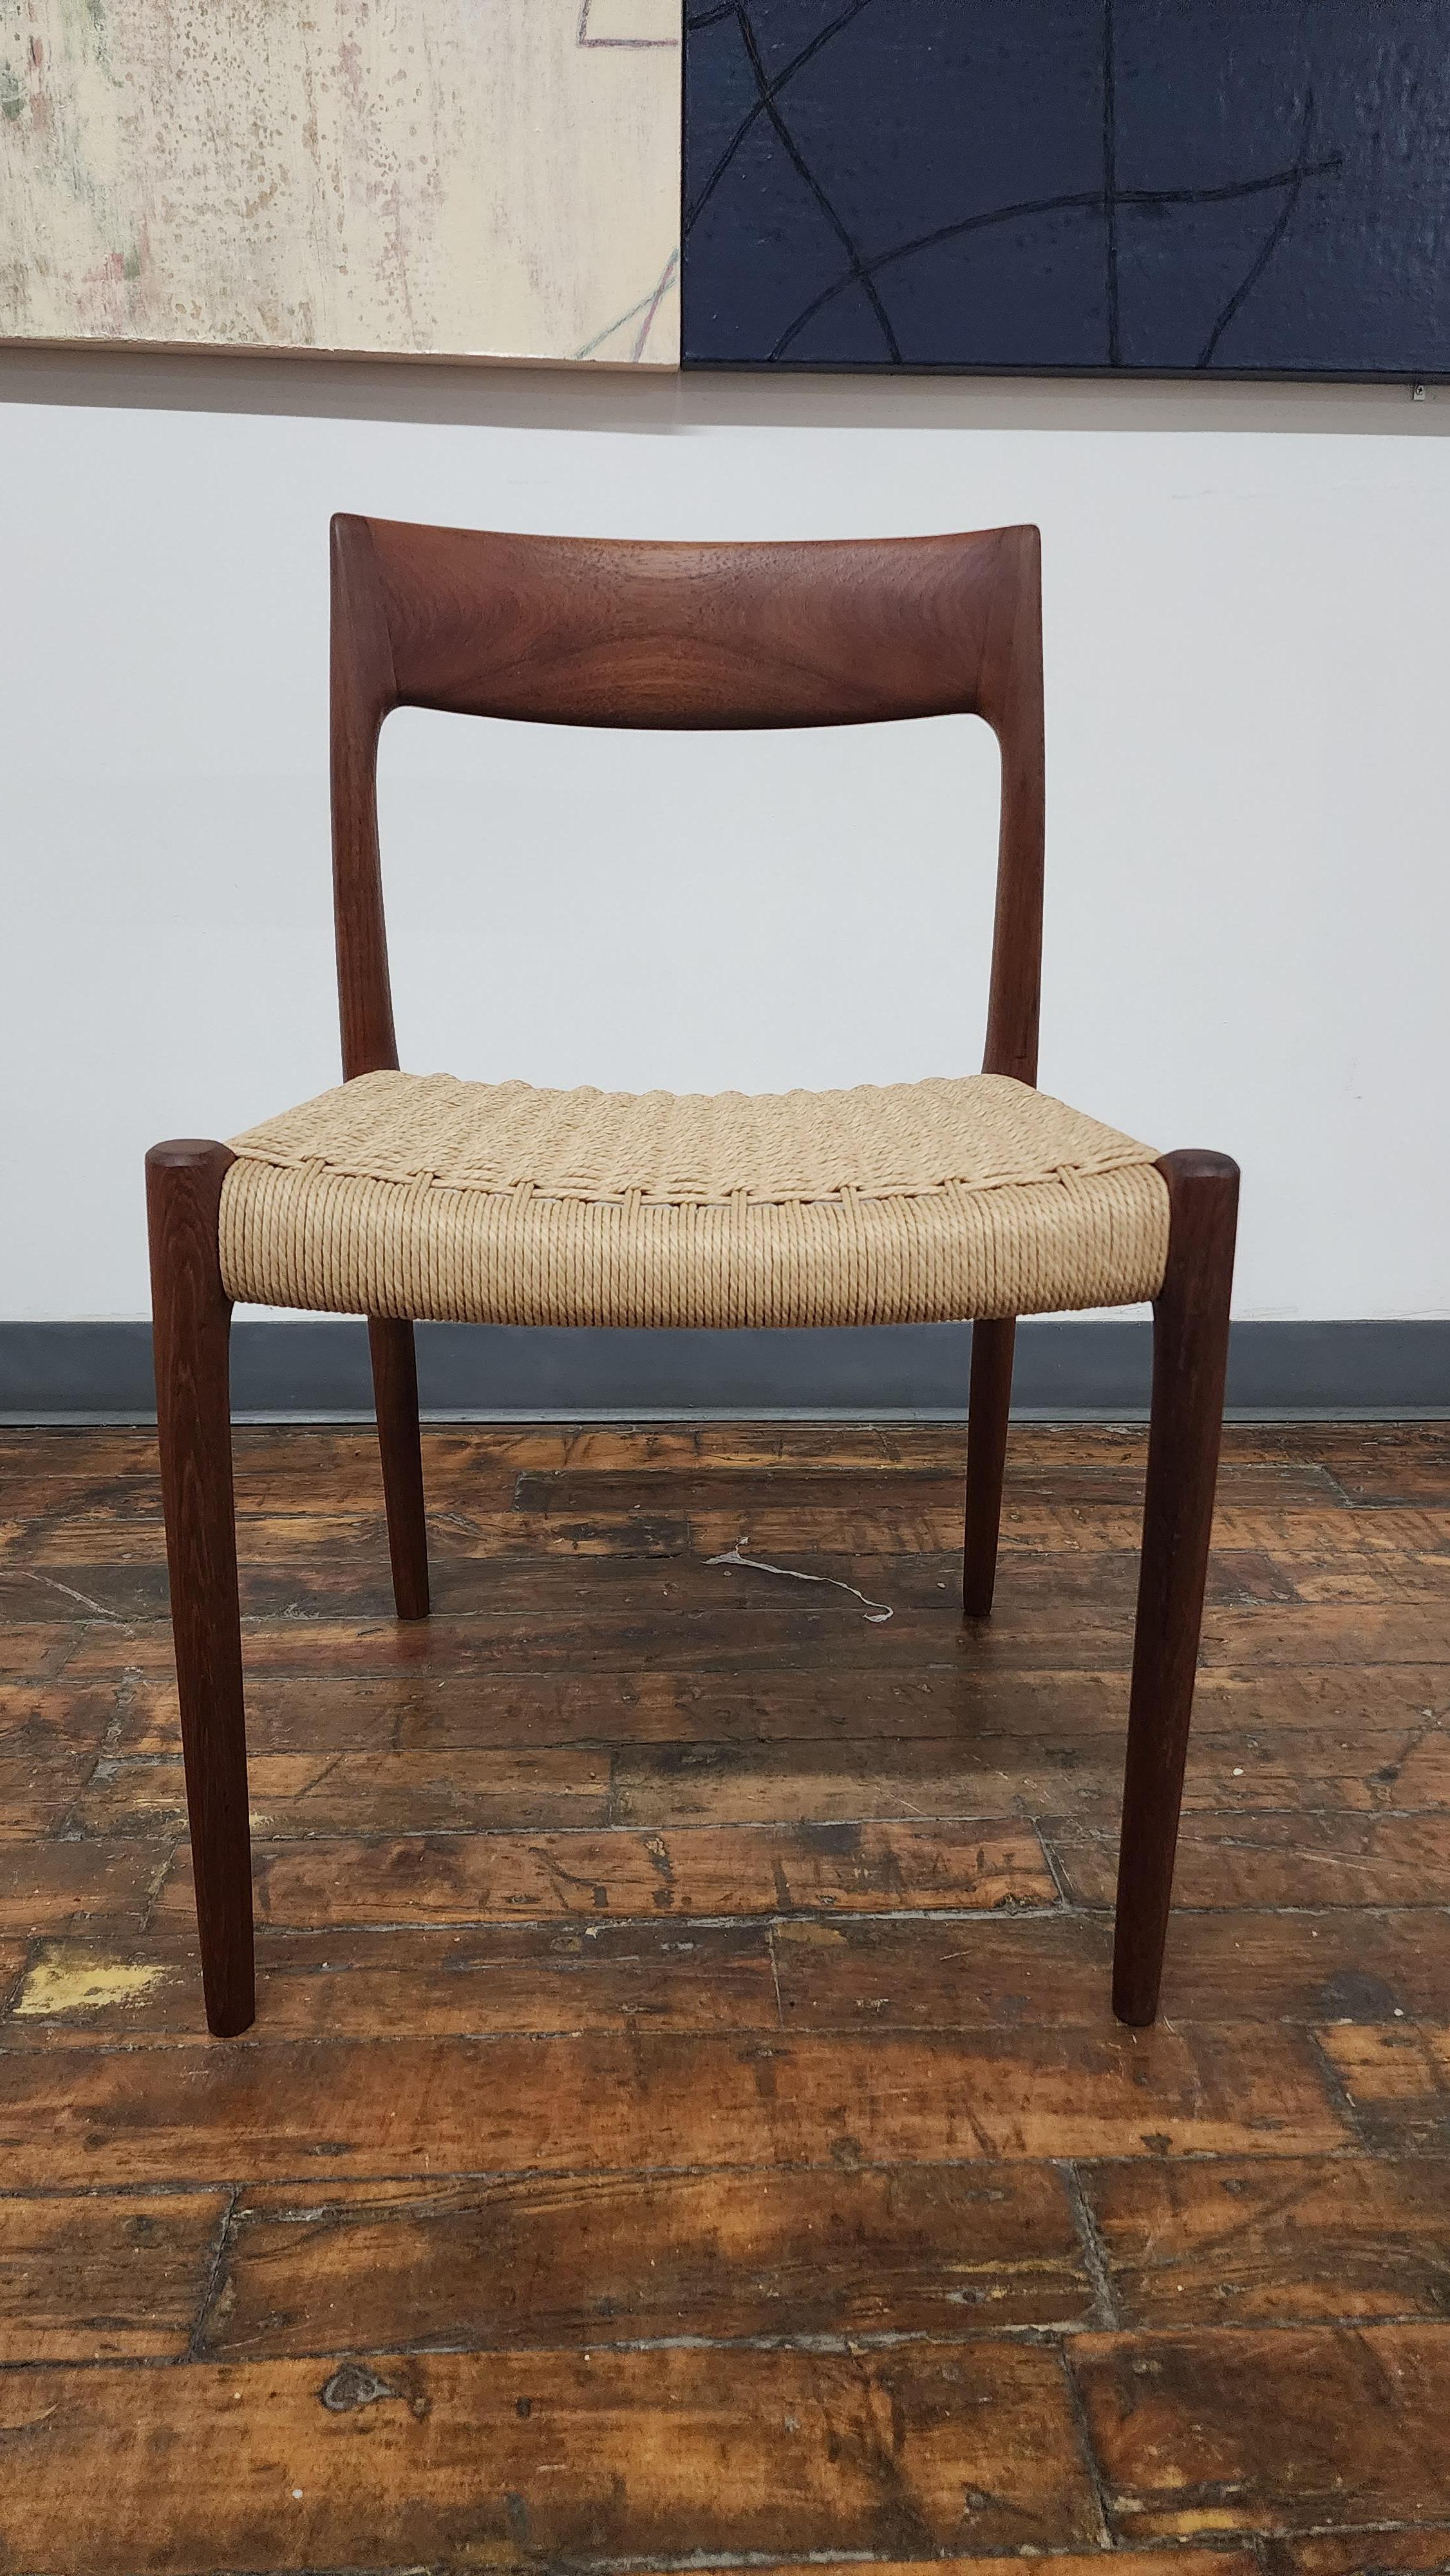 Beautiful refinished teak side chair, model 77 by Niels.moller for J.L. Mollers mobelfabrik.  This chair has been refinished and has new danish paper cord. there are 5 available.  additional model 57 arm chairnis available to make a set of 6.